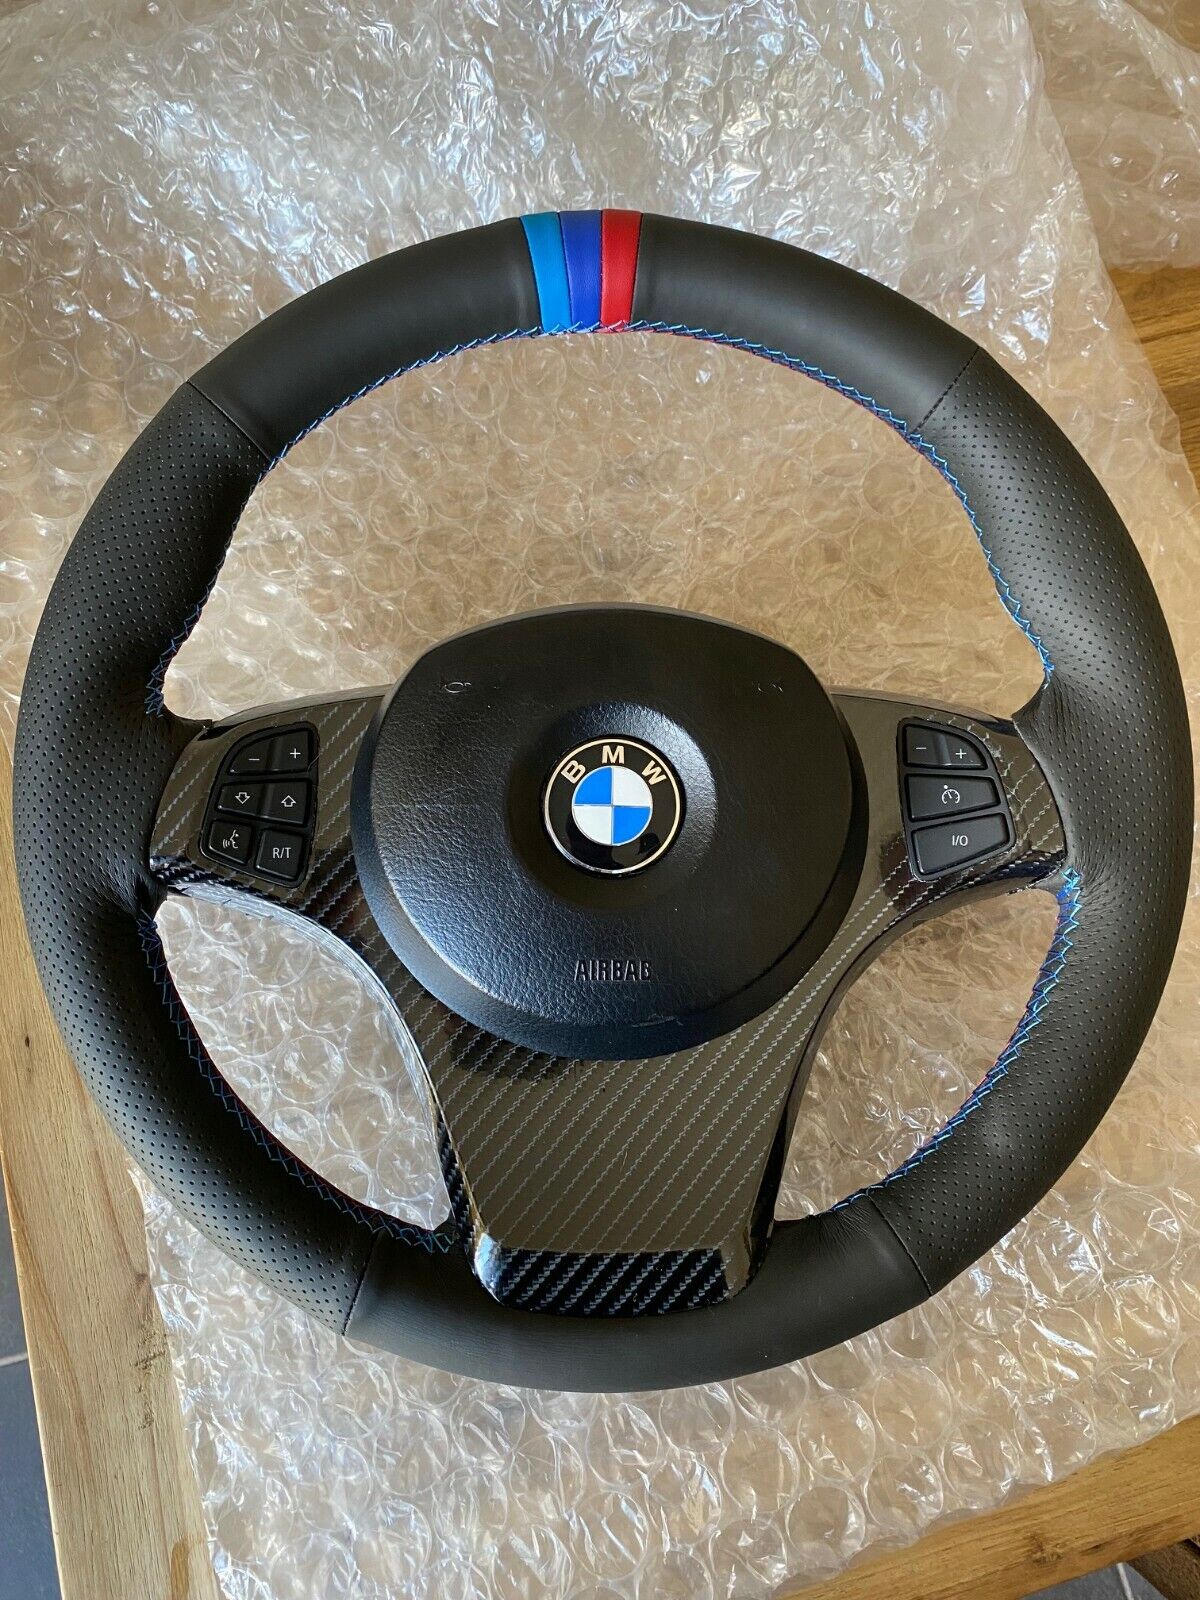 BMW X3 E83 X5 E53 04+ Leather M Sport Steering Wheel New Leather Stitch Carbon